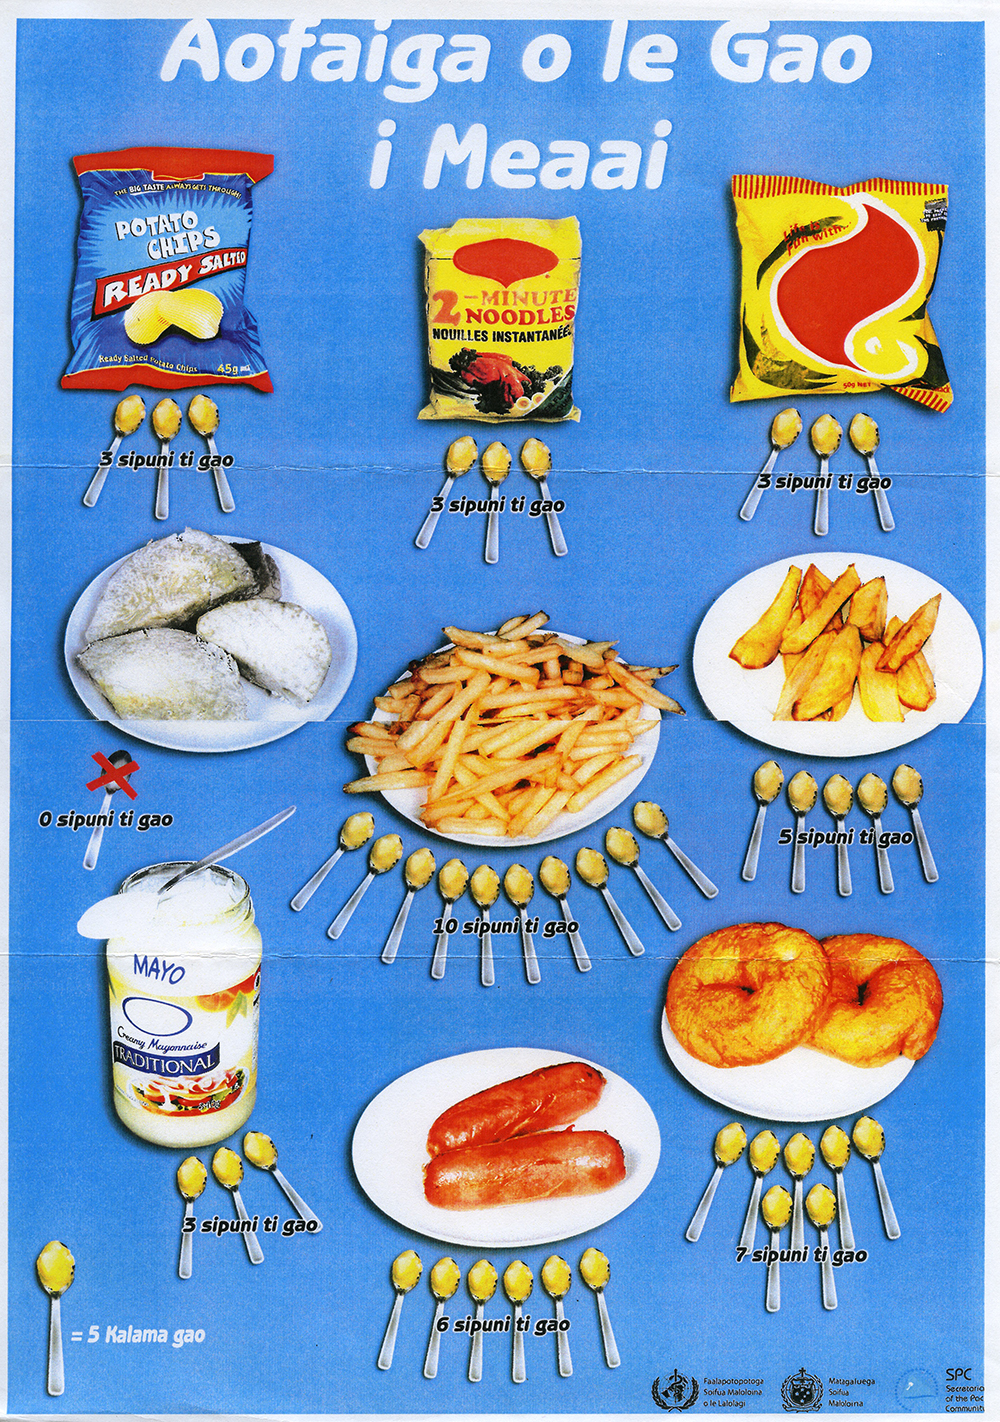 Health promotion poster, which translates as “Amount of fat in food.” Photo by Jessica Hardin.